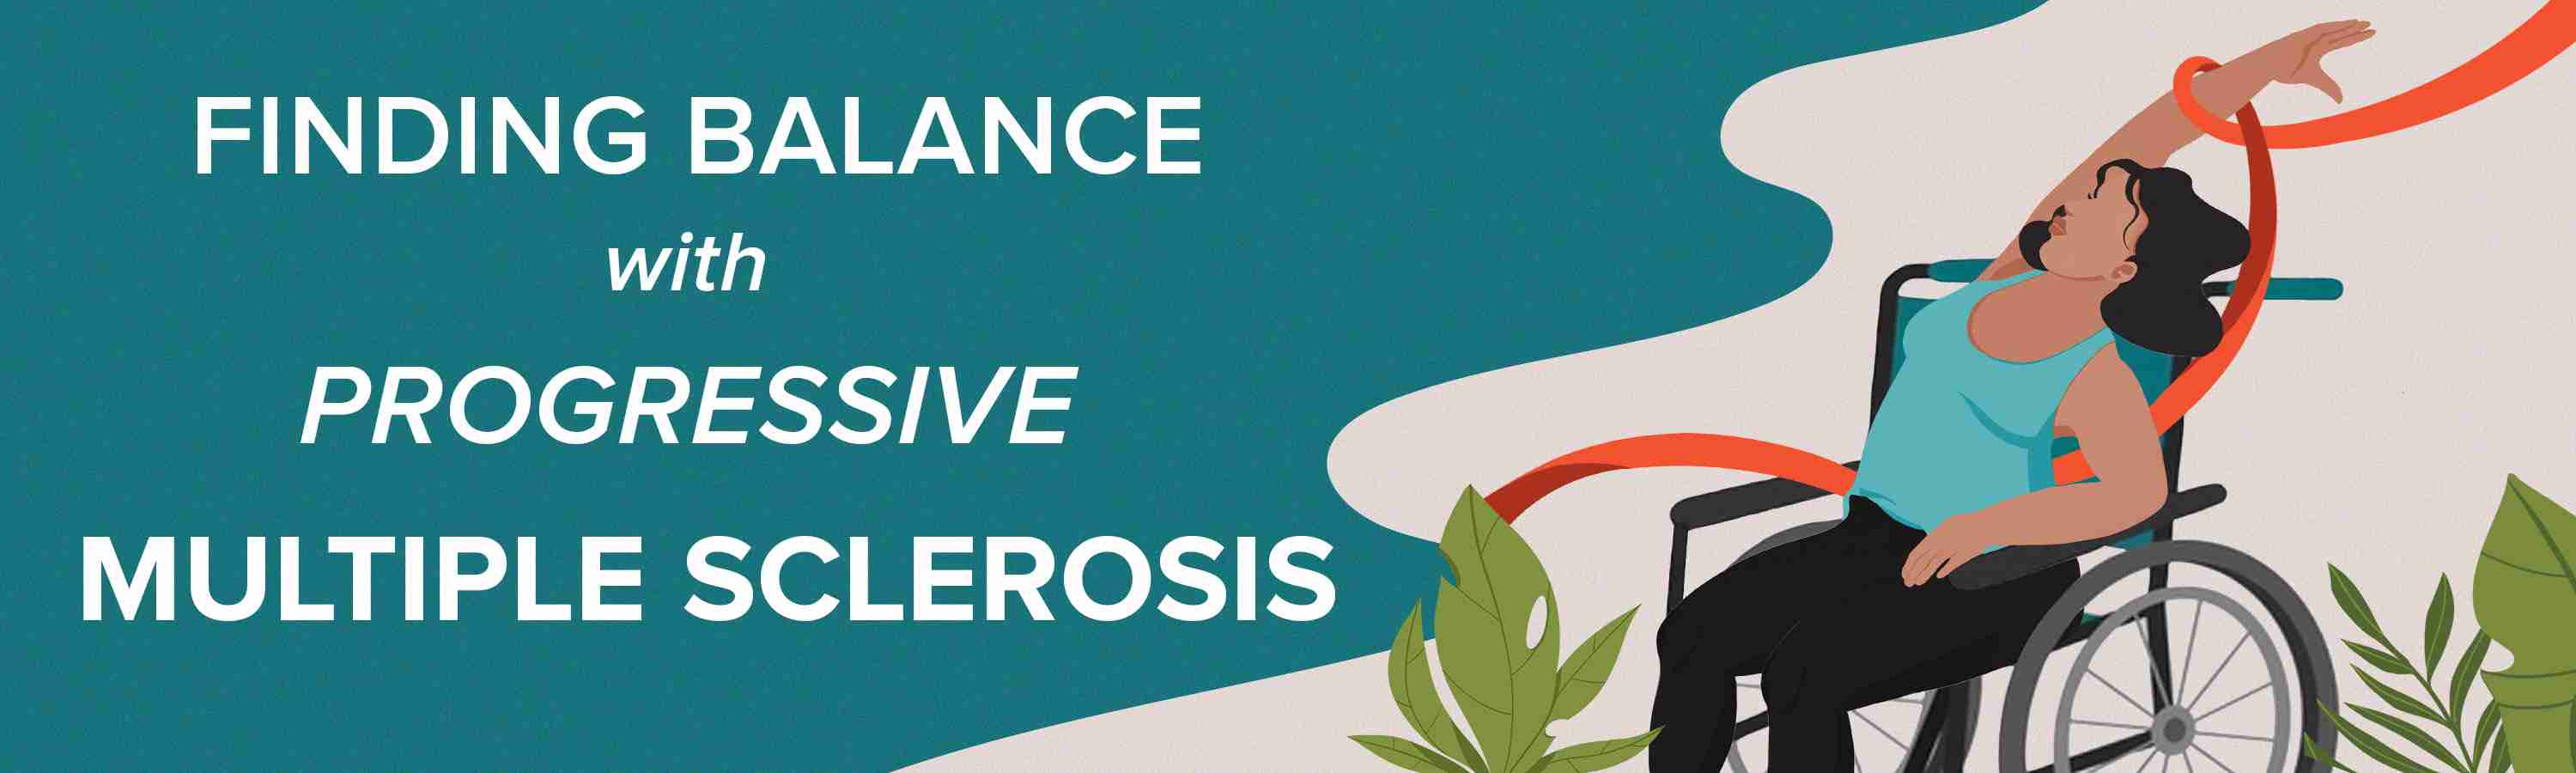 Finding Balance with Progressing Multiple Sclerosis